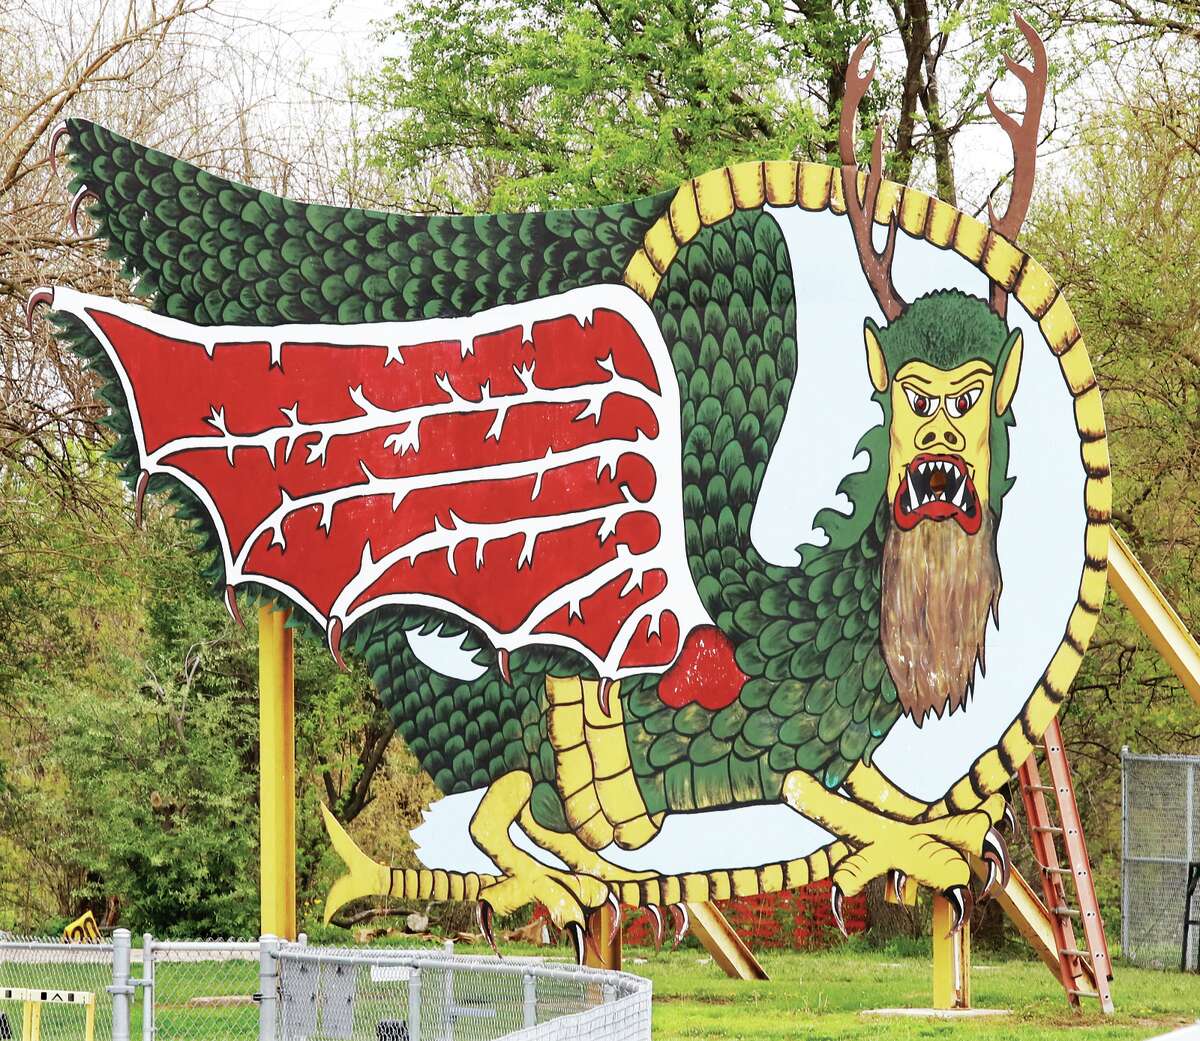 John Badman|The Telegraph The old steel Piasa Bird, restored, still stands at Southwestern High School football field in honor of the school mascot. The bird was erected in 1984 on the bluff at Norman's Landing in what is today Great Rivers Park. A project by the Alton-Godfrey Rotary Club, the creature whose name means "bird that devours man" was completed with help from throughout the community. National Marine Service in Hartford donated the steel and labor to sculpt the 9,000-pound legendary creature. Nine local artists helped paint the creature, which measures 23 by 40 feet. It was removed from the bluff as it began to rust and plans were developed to repaint the Indian artwork onto the limestone bluff closer to Alton. Southwestern High School bought the old bird for a dollar, restored it, and placed it at Knapp Field where it remains today, visible from Illinois 111 north of Illinois 16 in Macoupin County.